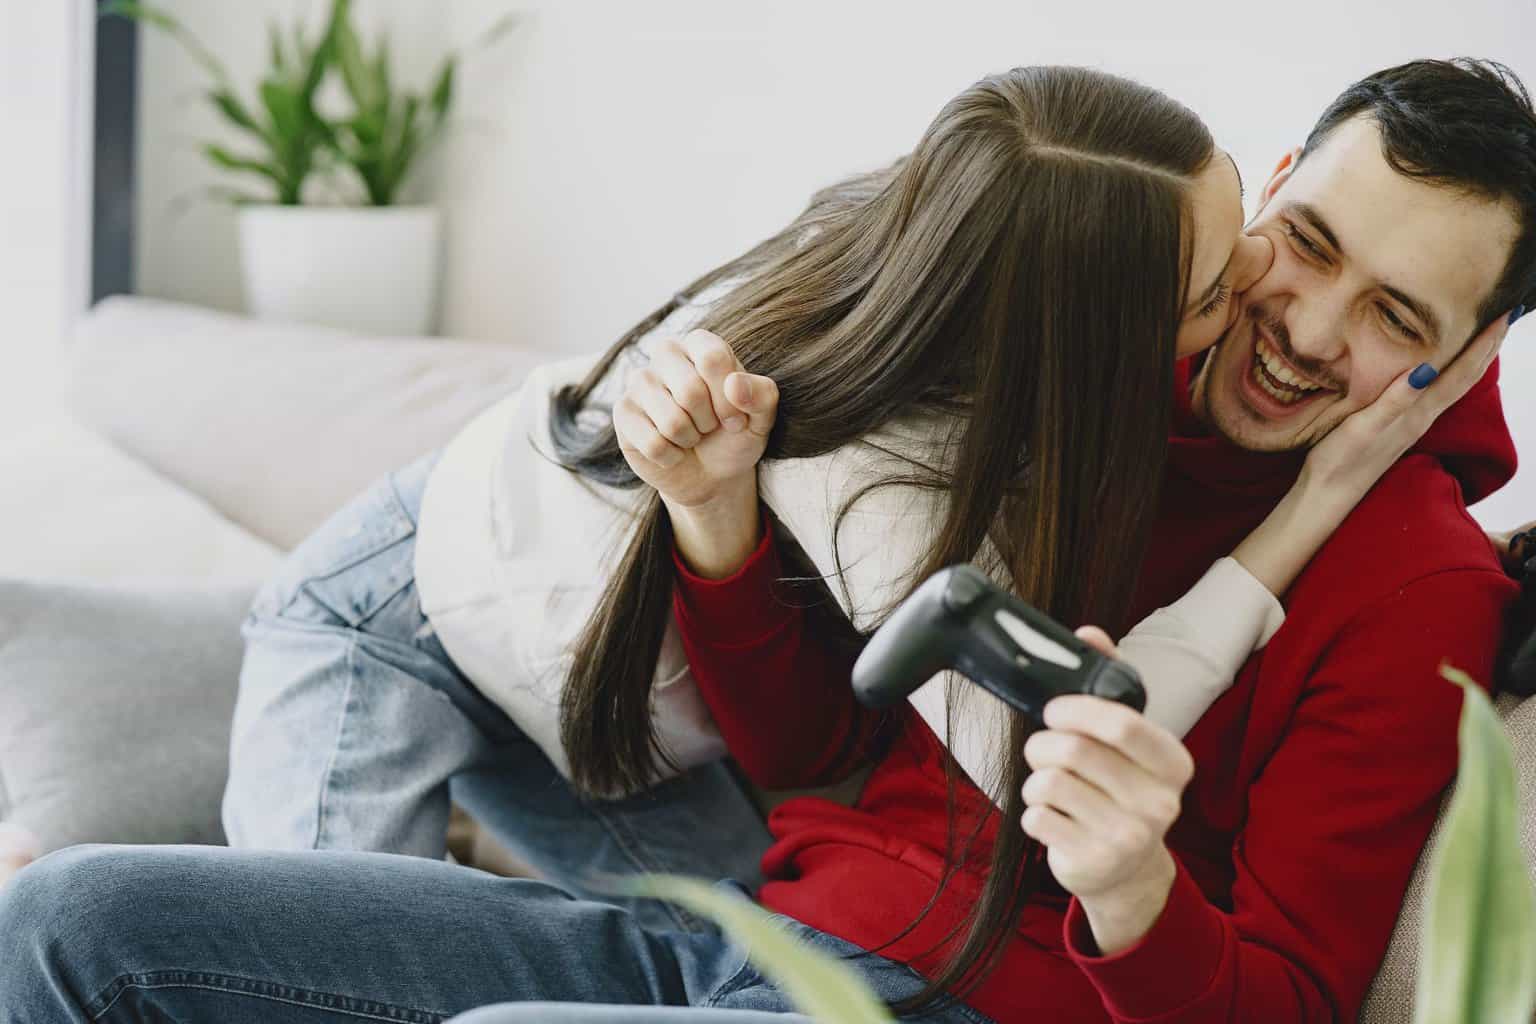 16 Games To Play With Your Girlfriend Fun Free And Flirty